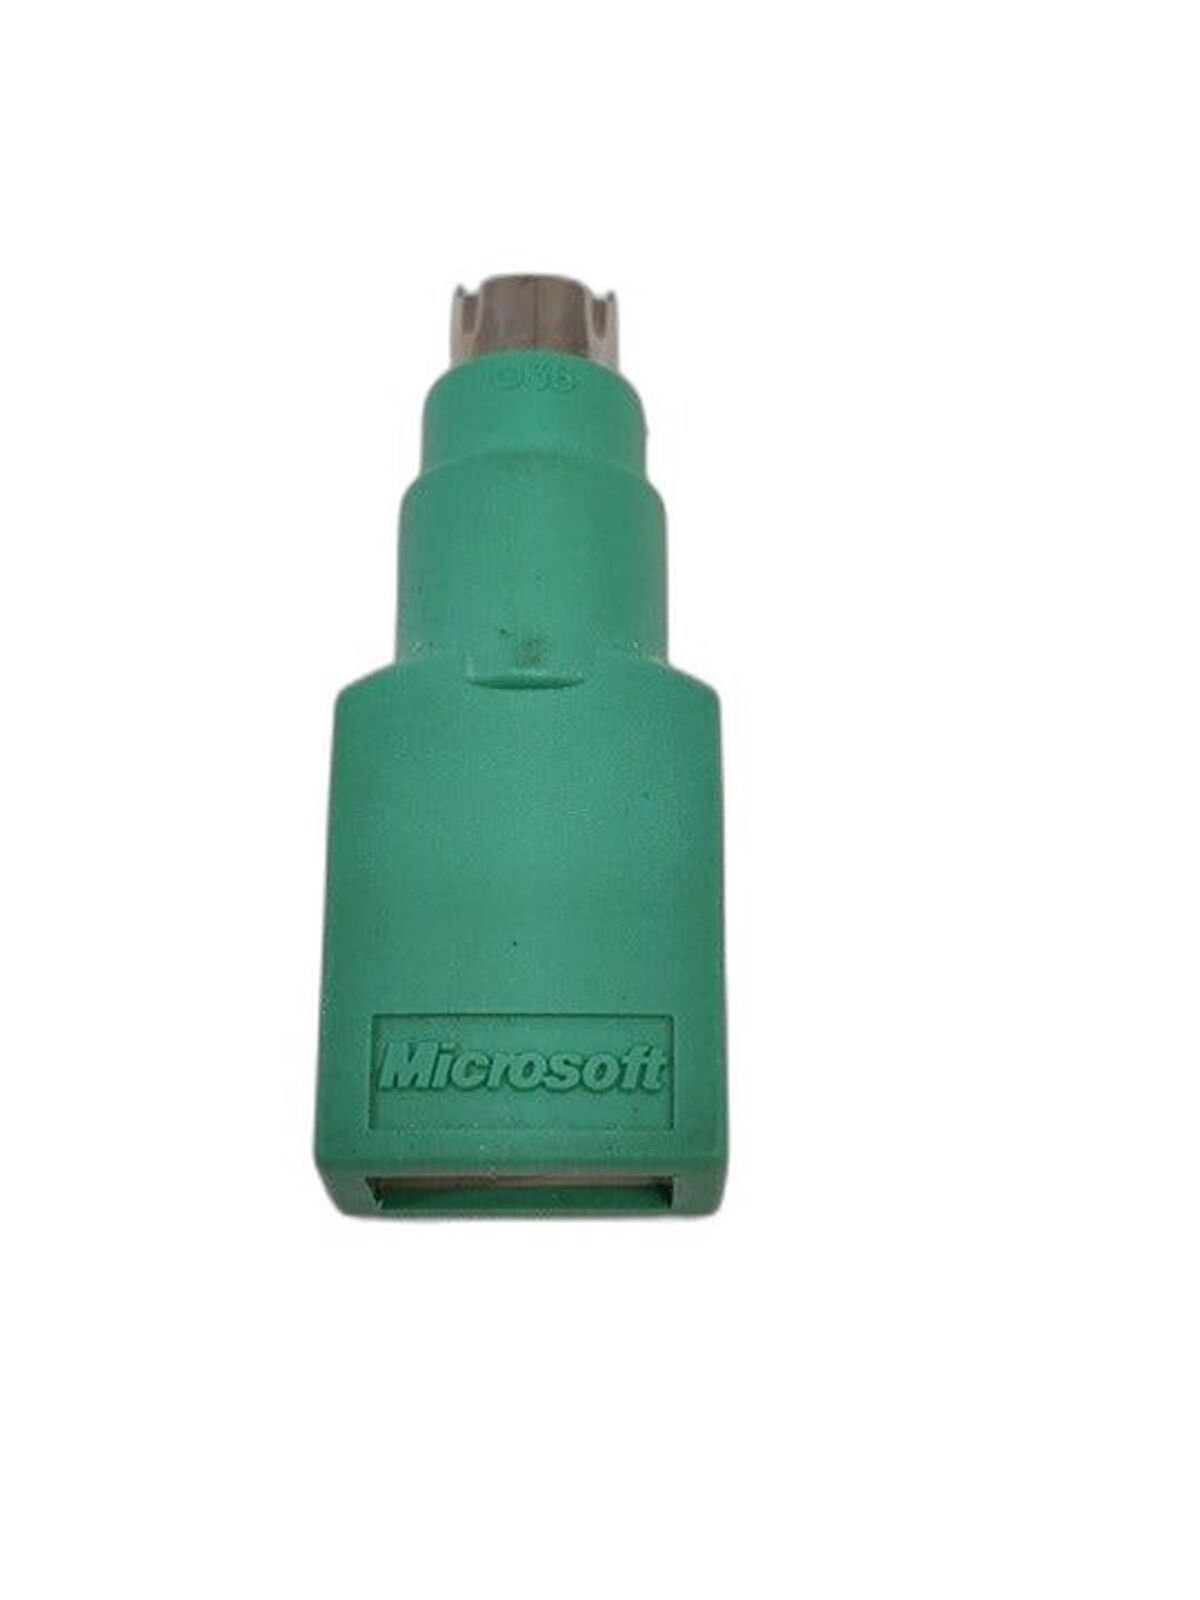 Primary image for Vintage MICROSOFT USB Female to PS/2 Male Adapter Converter for Mouse PS2